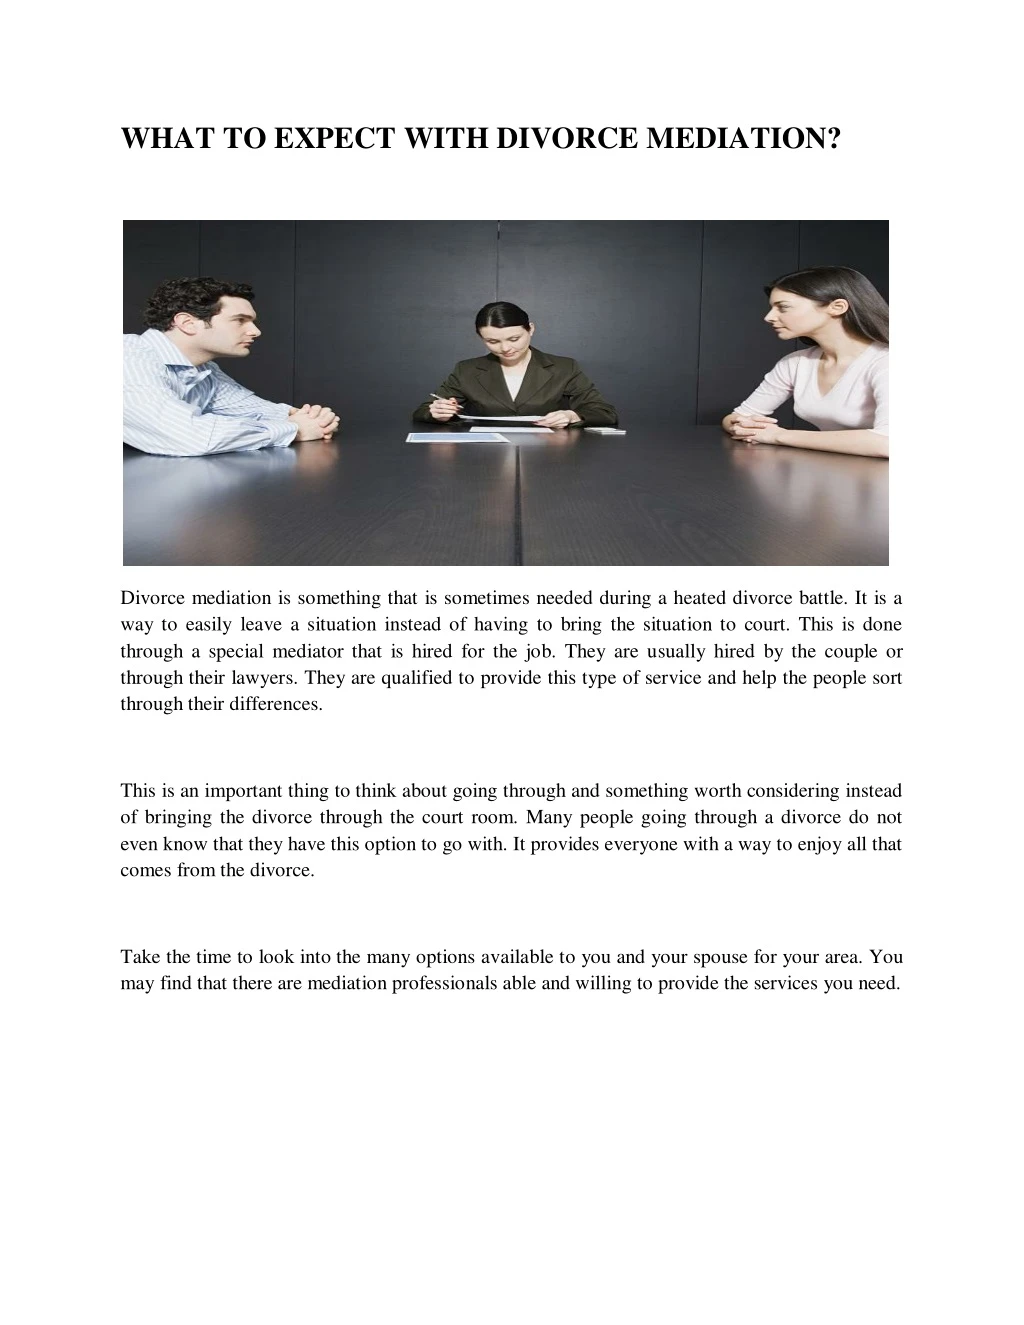 what to expect with divorce mediation